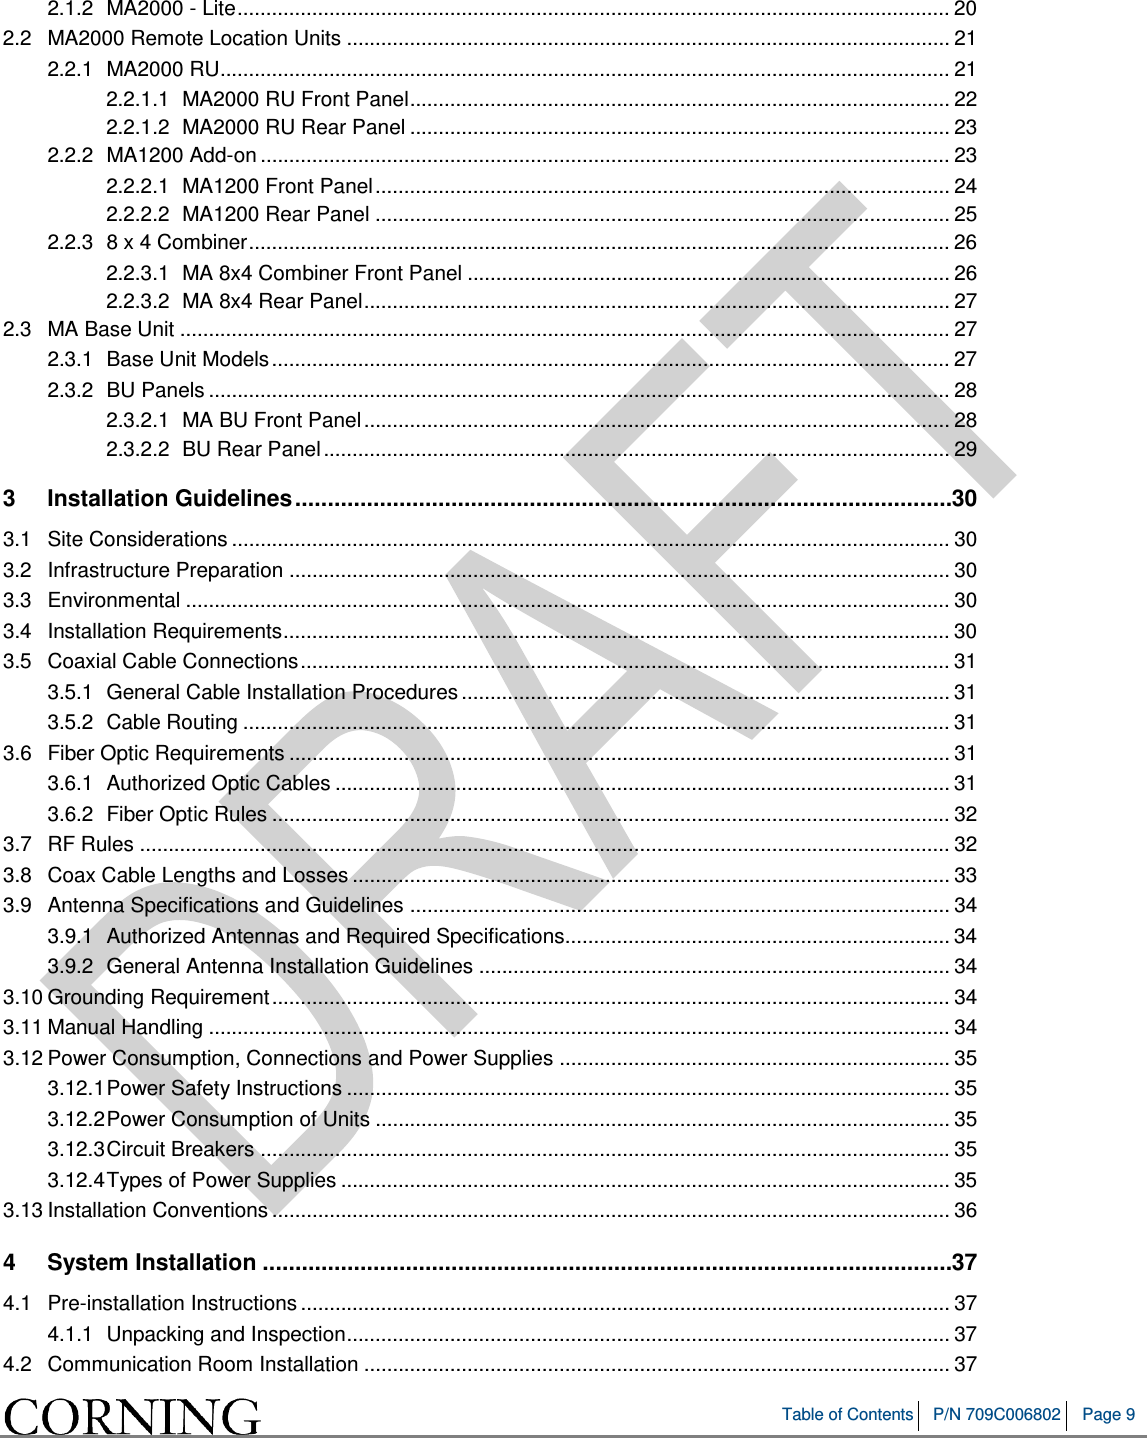   Table of Contents P/N 709C006802 Page 9   2.1.2 MA2000 - Lite ............................................................................................................................ 20 2.2 MA2000 Remote Location Units ......................................................................................................... 21 2.2.1 MA2000 RU............................................................................................................................... 21 2.2.1.1 MA2000 RU Front Panel .............................................................................................. 22 2.2.1.2 MA2000 RU Rear Panel .............................................................................................. 23 2.2.2 MA1200 Add-on ........................................................................................................................ 23 2.2.2.1 MA1200 Front Panel .................................................................................................... 24 2.2.2.2 MA1200 Rear Panel .................................................................................................... 25 2.2.3 8 x 4 Combiner .......................................................................................................................... 26 2.2.3.1 MA 8x4 Combiner Front Panel .................................................................................... 26 2.2.3.2 MA 8x4 Rear Panel ...................................................................................................... 27 2.3 MA Base Unit ...................................................................................................................................... 27 2.3.1 Base Unit Models ...................................................................................................................... 27 2.3.2 BU Panels ................................................................................................................................. 28 2.3.2.1 MA BU Front Panel ...................................................................................................... 28 2.3.2.2 BU Rear Panel ............................................................................................................. 29 3 Installation Guidelines ..................................................................................................... 30 3.1 Site Considerations ............................................................................................................................. 30 3.2 Infrastructure Preparation ................................................................................................................... 30 3.3 Environmental ..................................................................................................................................... 30 3.4 Installation Requirements .................................................................................................................... 30 3.5 Coaxial Cable Connections ................................................................................................................. 31 3.5.1 General Cable Installation Procedures ..................................................................................... 31 3.5.2 Cable Routing ........................................................................................................................... 31 3.6 Fiber Optic Requirements ................................................................................................................... 31 3.6.1 Authorized Optic Cables ........................................................................................................... 31 3.6.2 Fiber Optic Rules ...................................................................................................................... 32 3.7 RF Rules ............................................................................................................................................. 32 3.8 Coax Cable Lengths and Losses ........................................................................................................ 33 3.9 Antenna Specifications and Guidelines .............................................................................................. 34 3.9.1 Authorized Antennas and Required Specifications................................................................... 34 3.9.2 General Antenna Installation Guidelines .................................................................................. 34 3.10 Grounding Requirement ...................................................................................................................... 34 3.11 Manual Handling ................................................................................................................................. 34 3.12 Power Consumption, Connections and Power Supplies .................................................................... 35 3.12.1 Power Safety Instructions ......................................................................................................... 35 3.12.2 Power Consumption of Units .................................................................................................... 35 3.12.3 Circuit Breakers ........................................................................................................................ 35 3.12.4 Types of Power Supplies .......................................................................................................... 35 3.13 Installation Conventions ...................................................................................................................... 36 4 System Installation .......................................................................................................... 37 4.1 Pre-installation Instructions ................................................................................................................. 37 4.1.1 Unpacking and Inspection ......................................................................................................... 37 4.2 Communication Room Installation ...................................................................................................... 37 